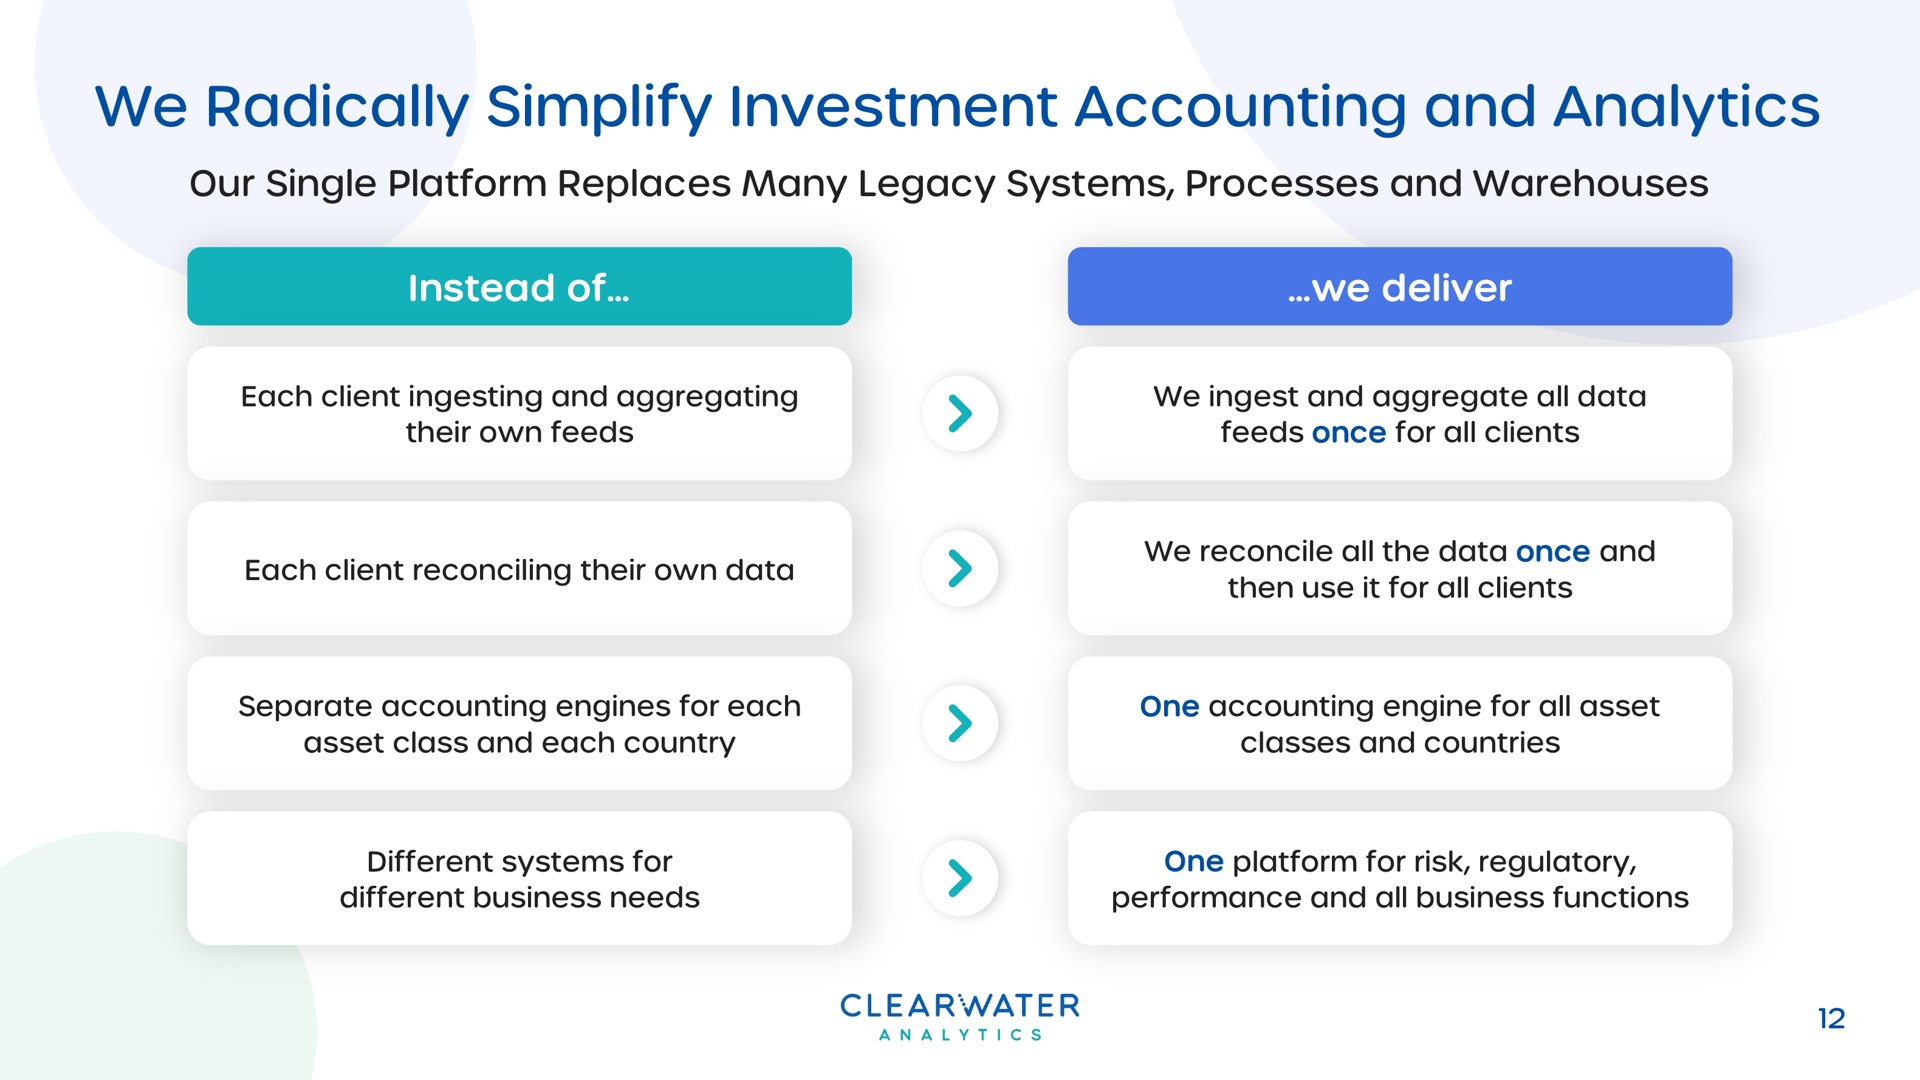 we radically simplify investment accounting and analytics | Clearwater Analytics